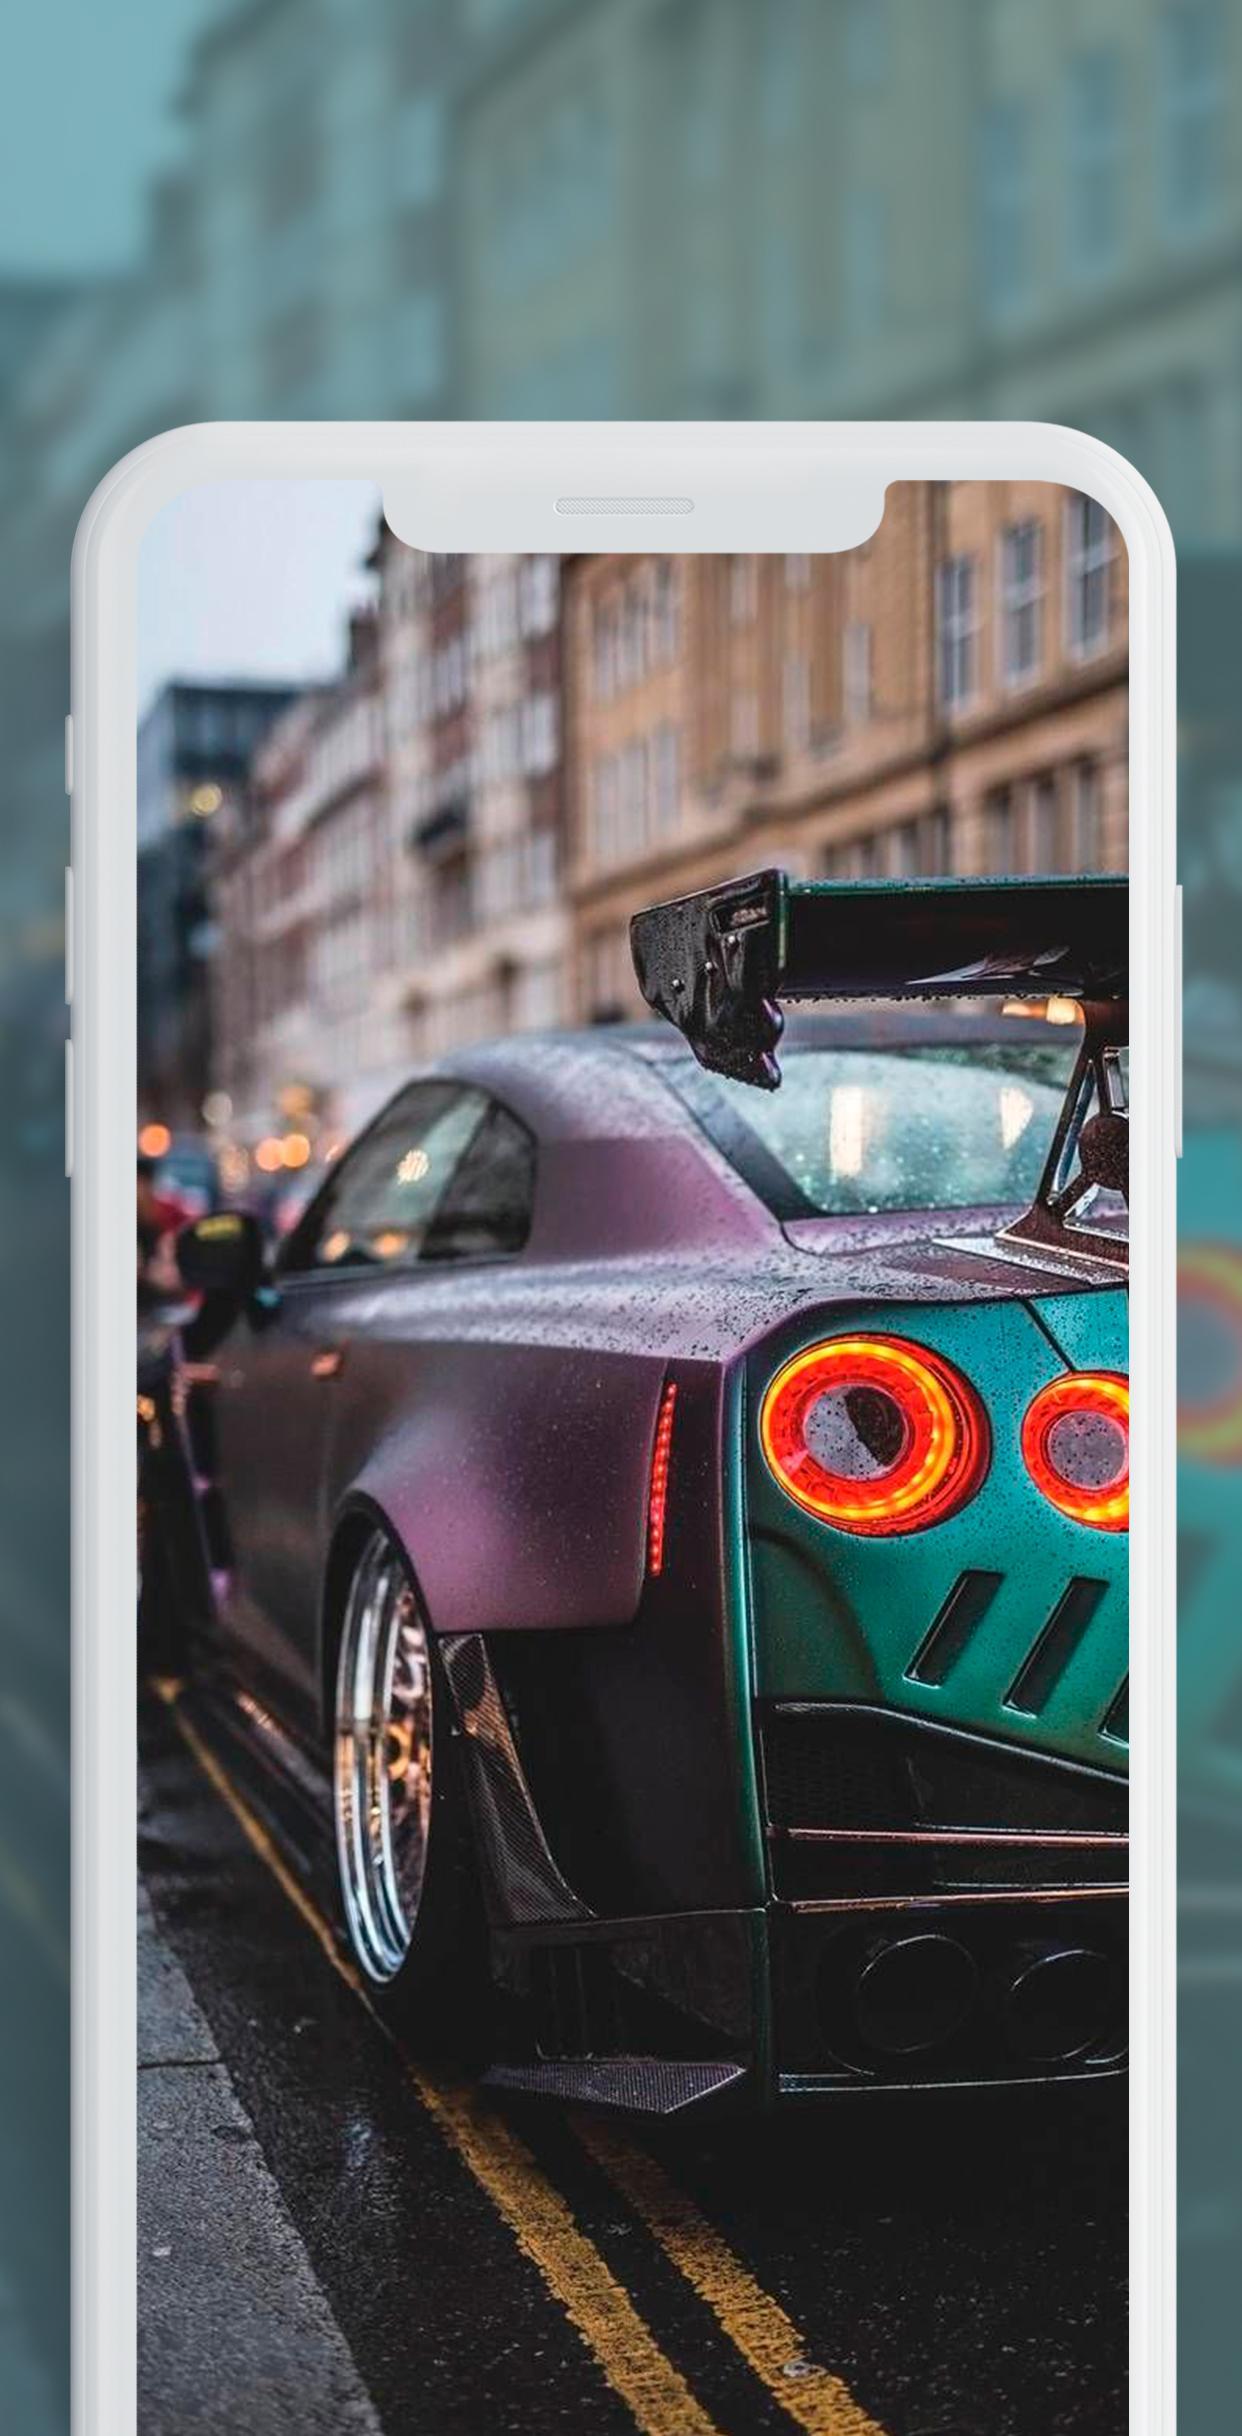 Skyline Gtr R34 Wallpapers Sports Car Wallpapers For Android Apk Download